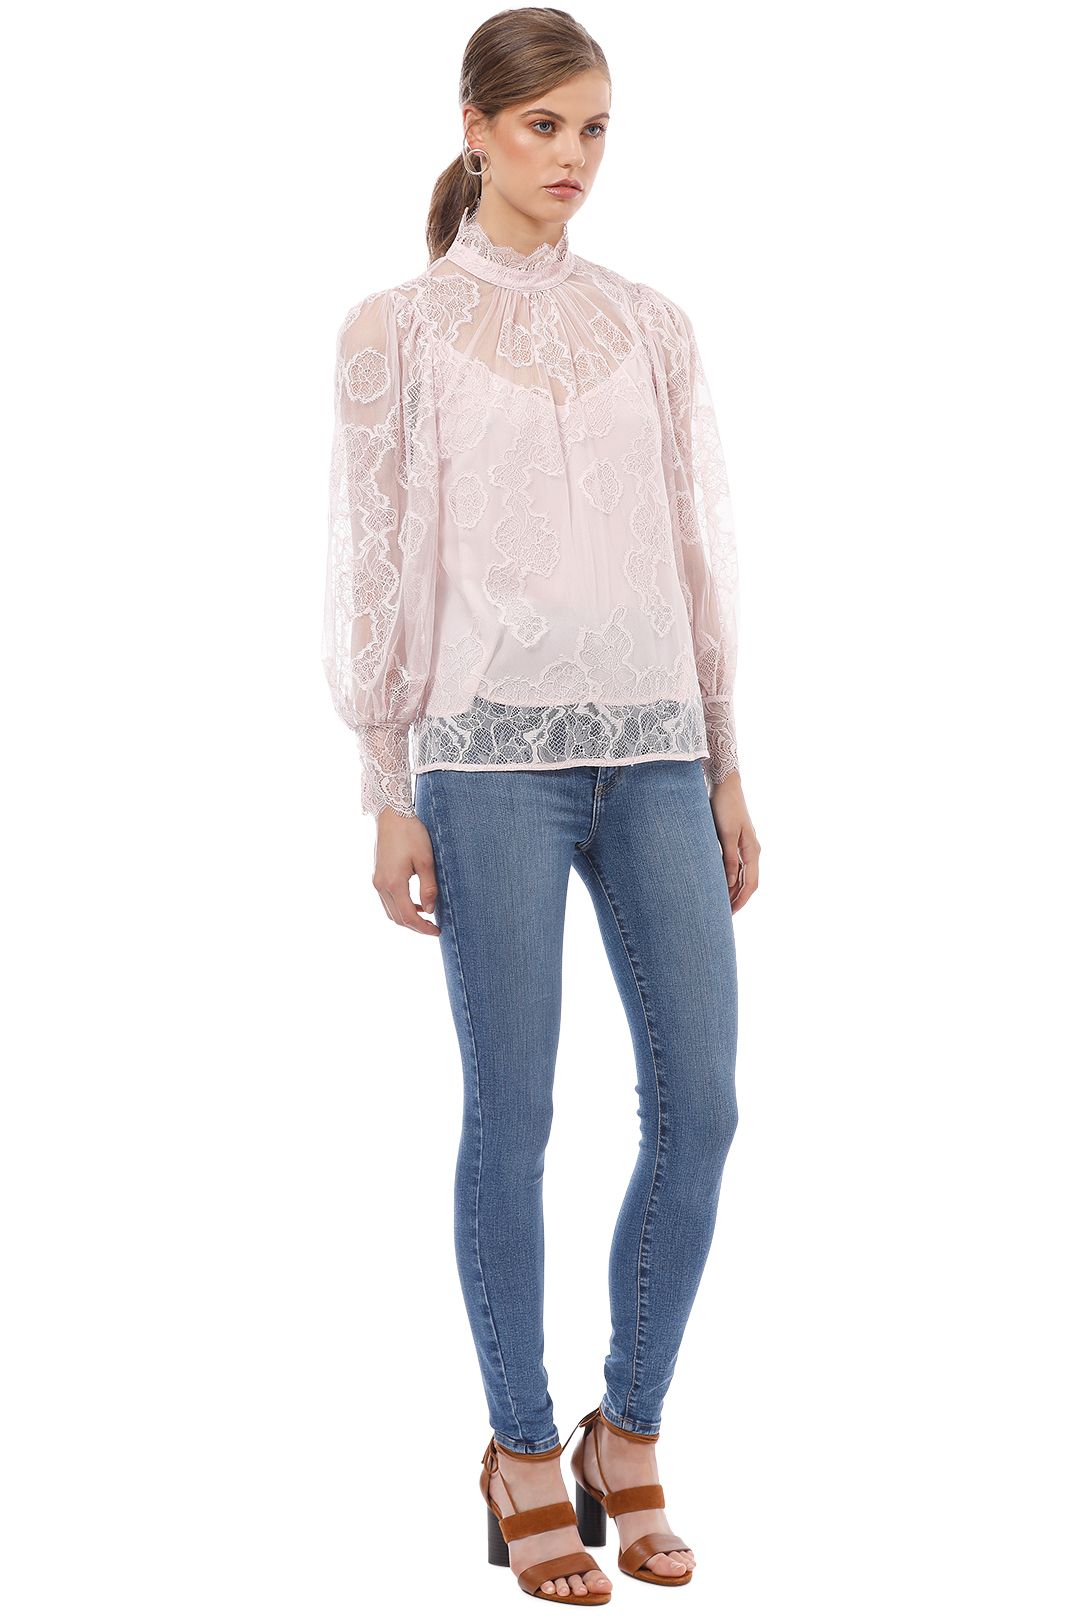 Witchery - Lace Balloon Sleeve Blouse - Pink - Side